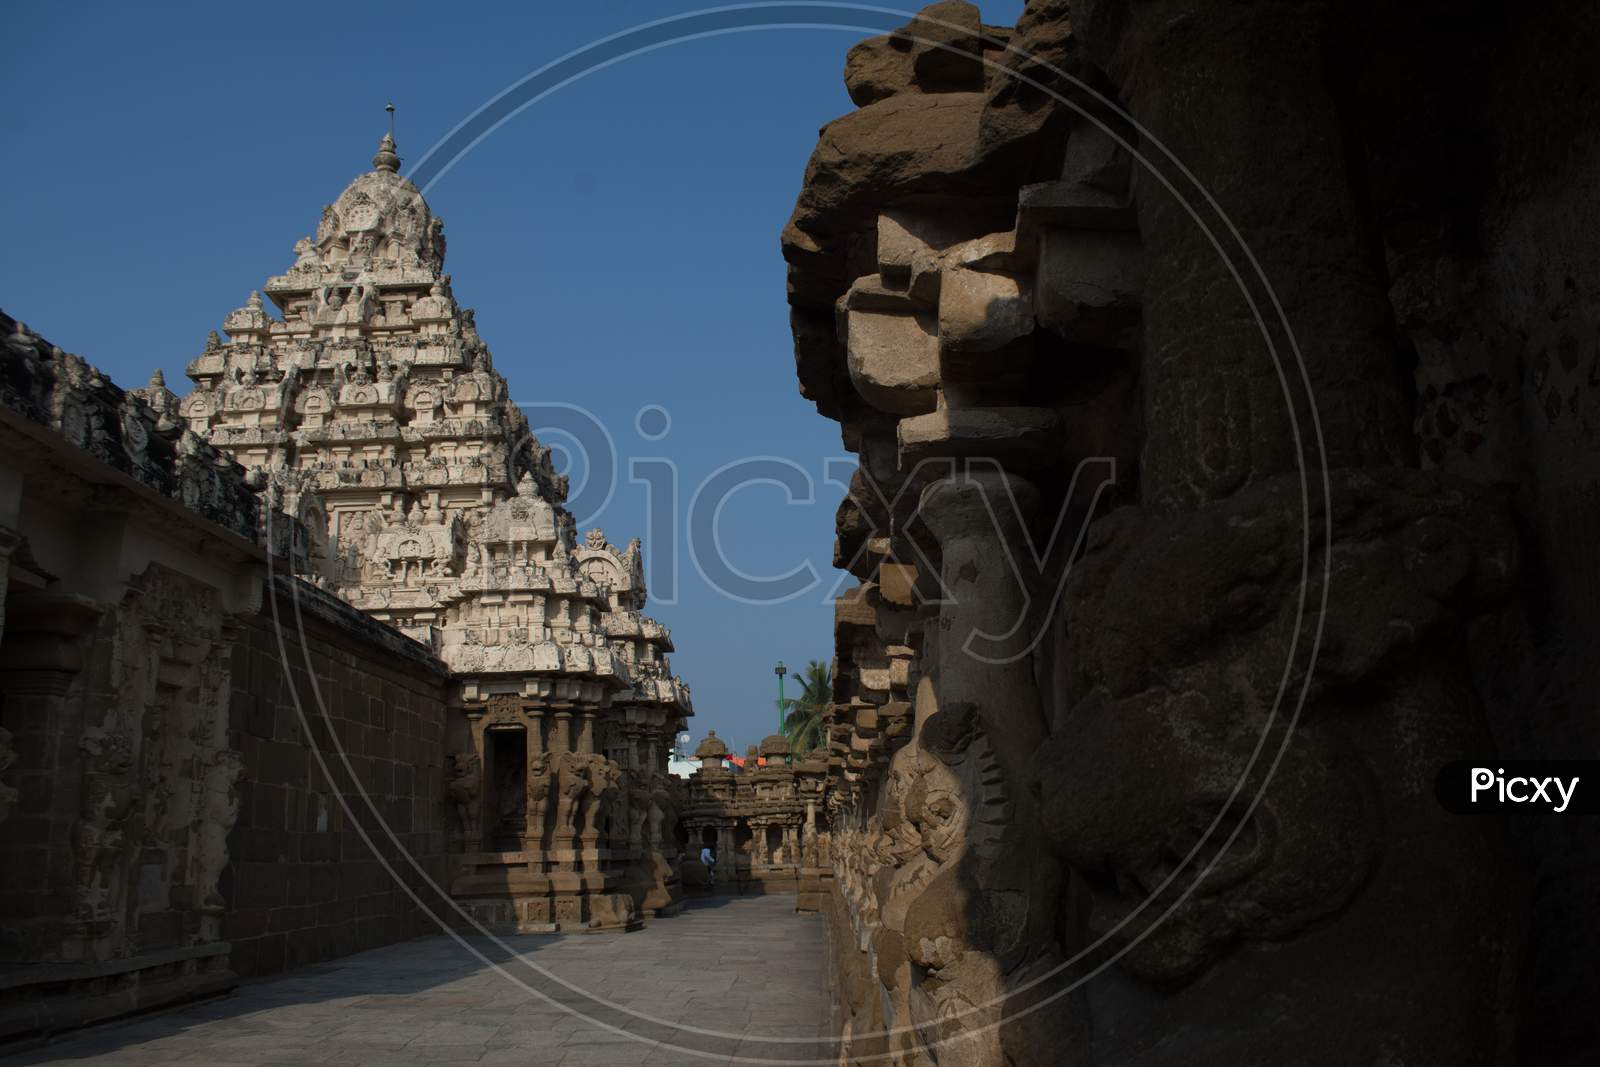 Architecture Of Ancient Hindu Temple With Stone Carved Temple Shrines